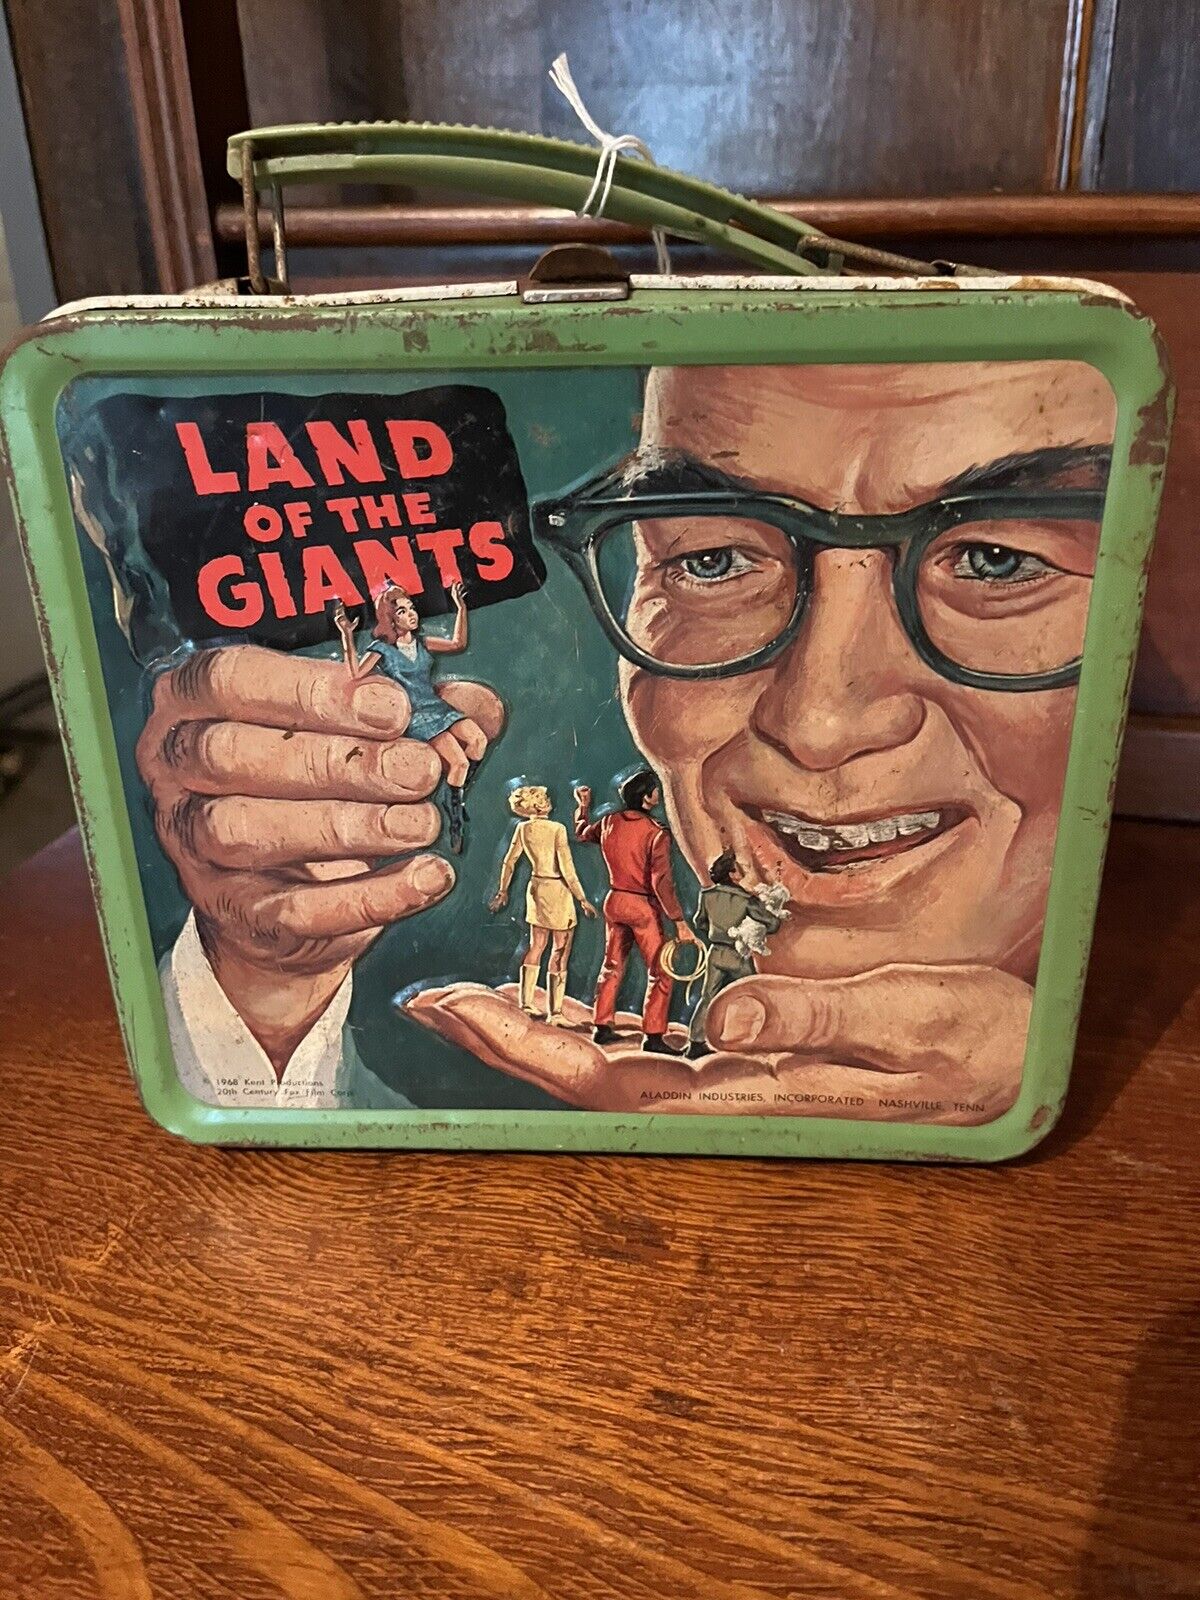 Vintage Land of the Giants Metal Embossed Lunchbox by Aladdin, No Thermos. ~1968